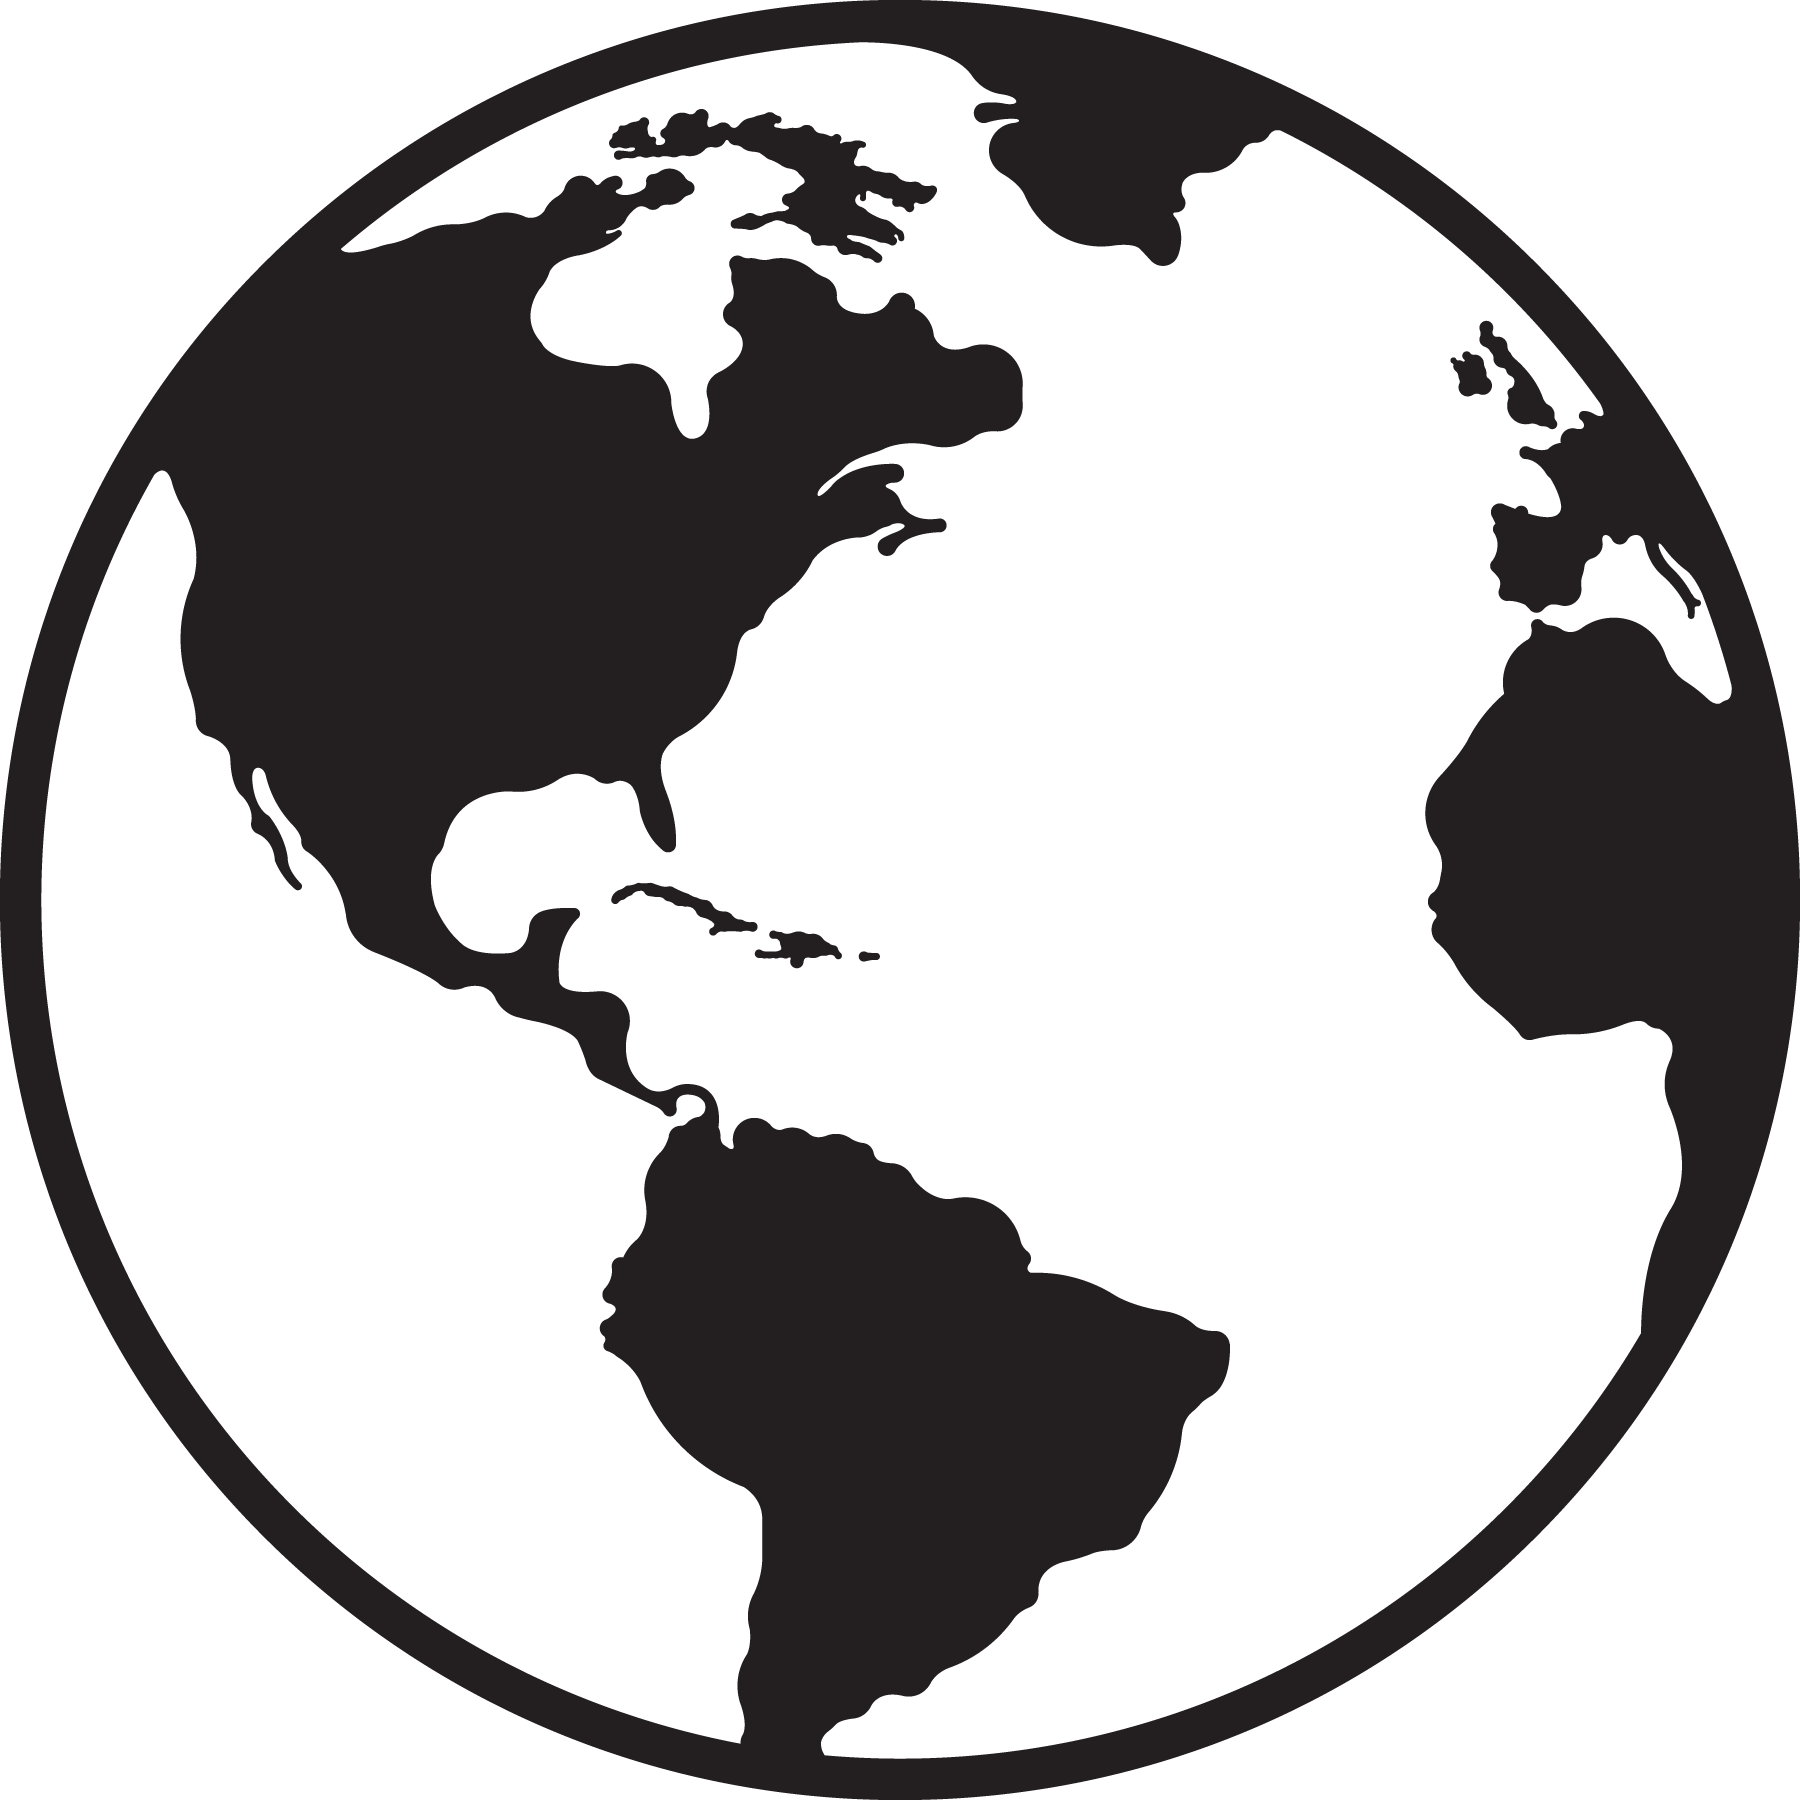 Black and white globe clipart clipground png